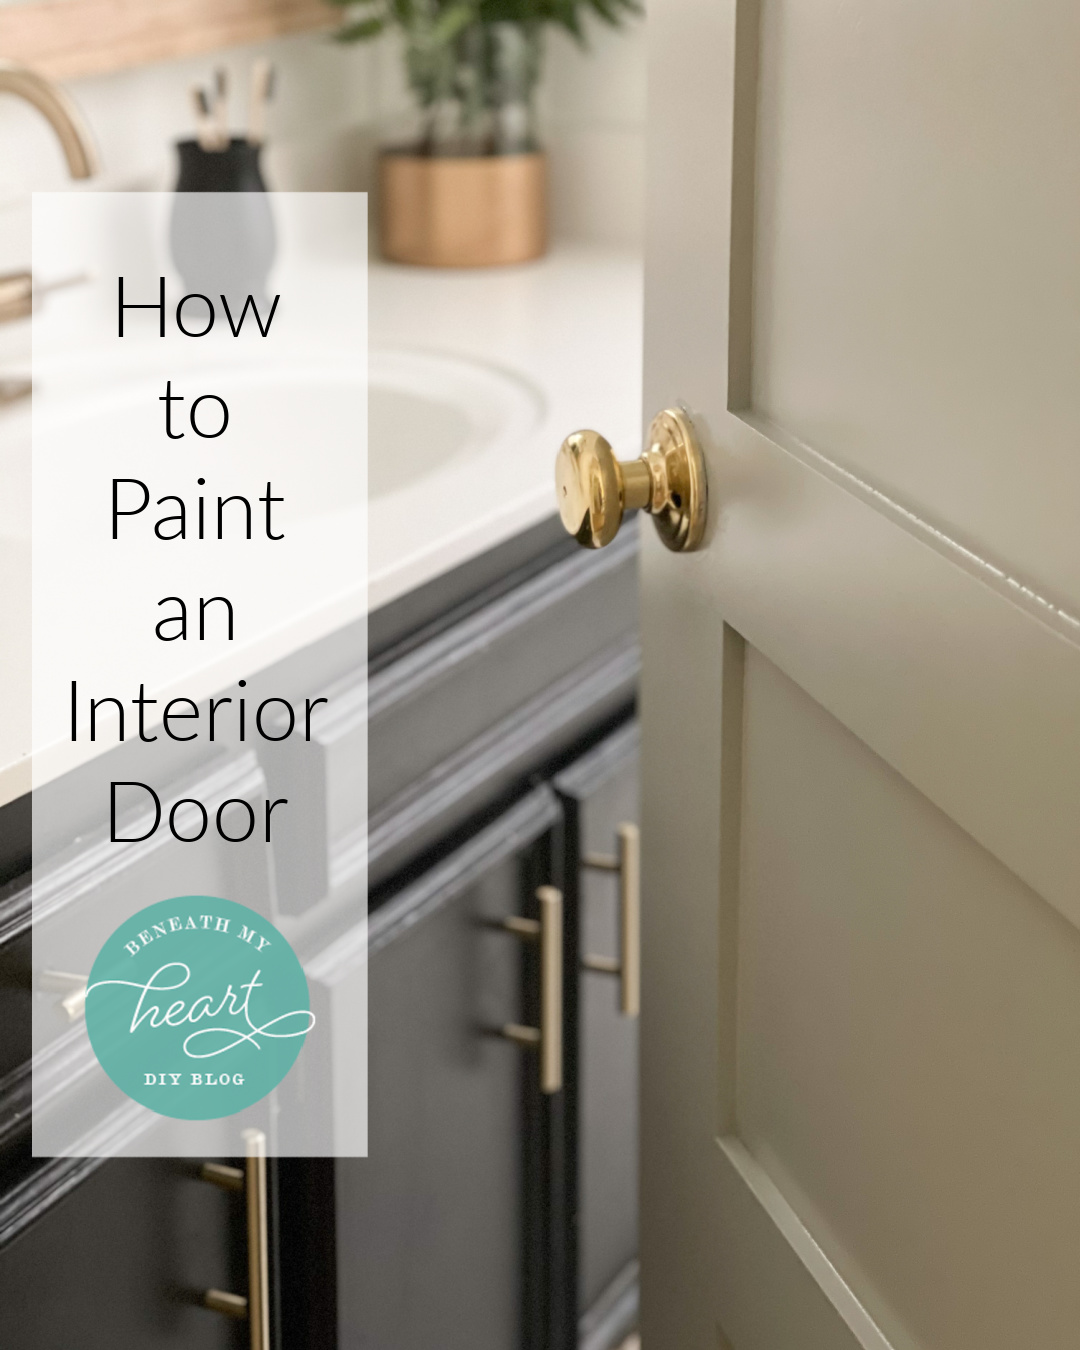 Steps to Painting a New Interior Paneled Door